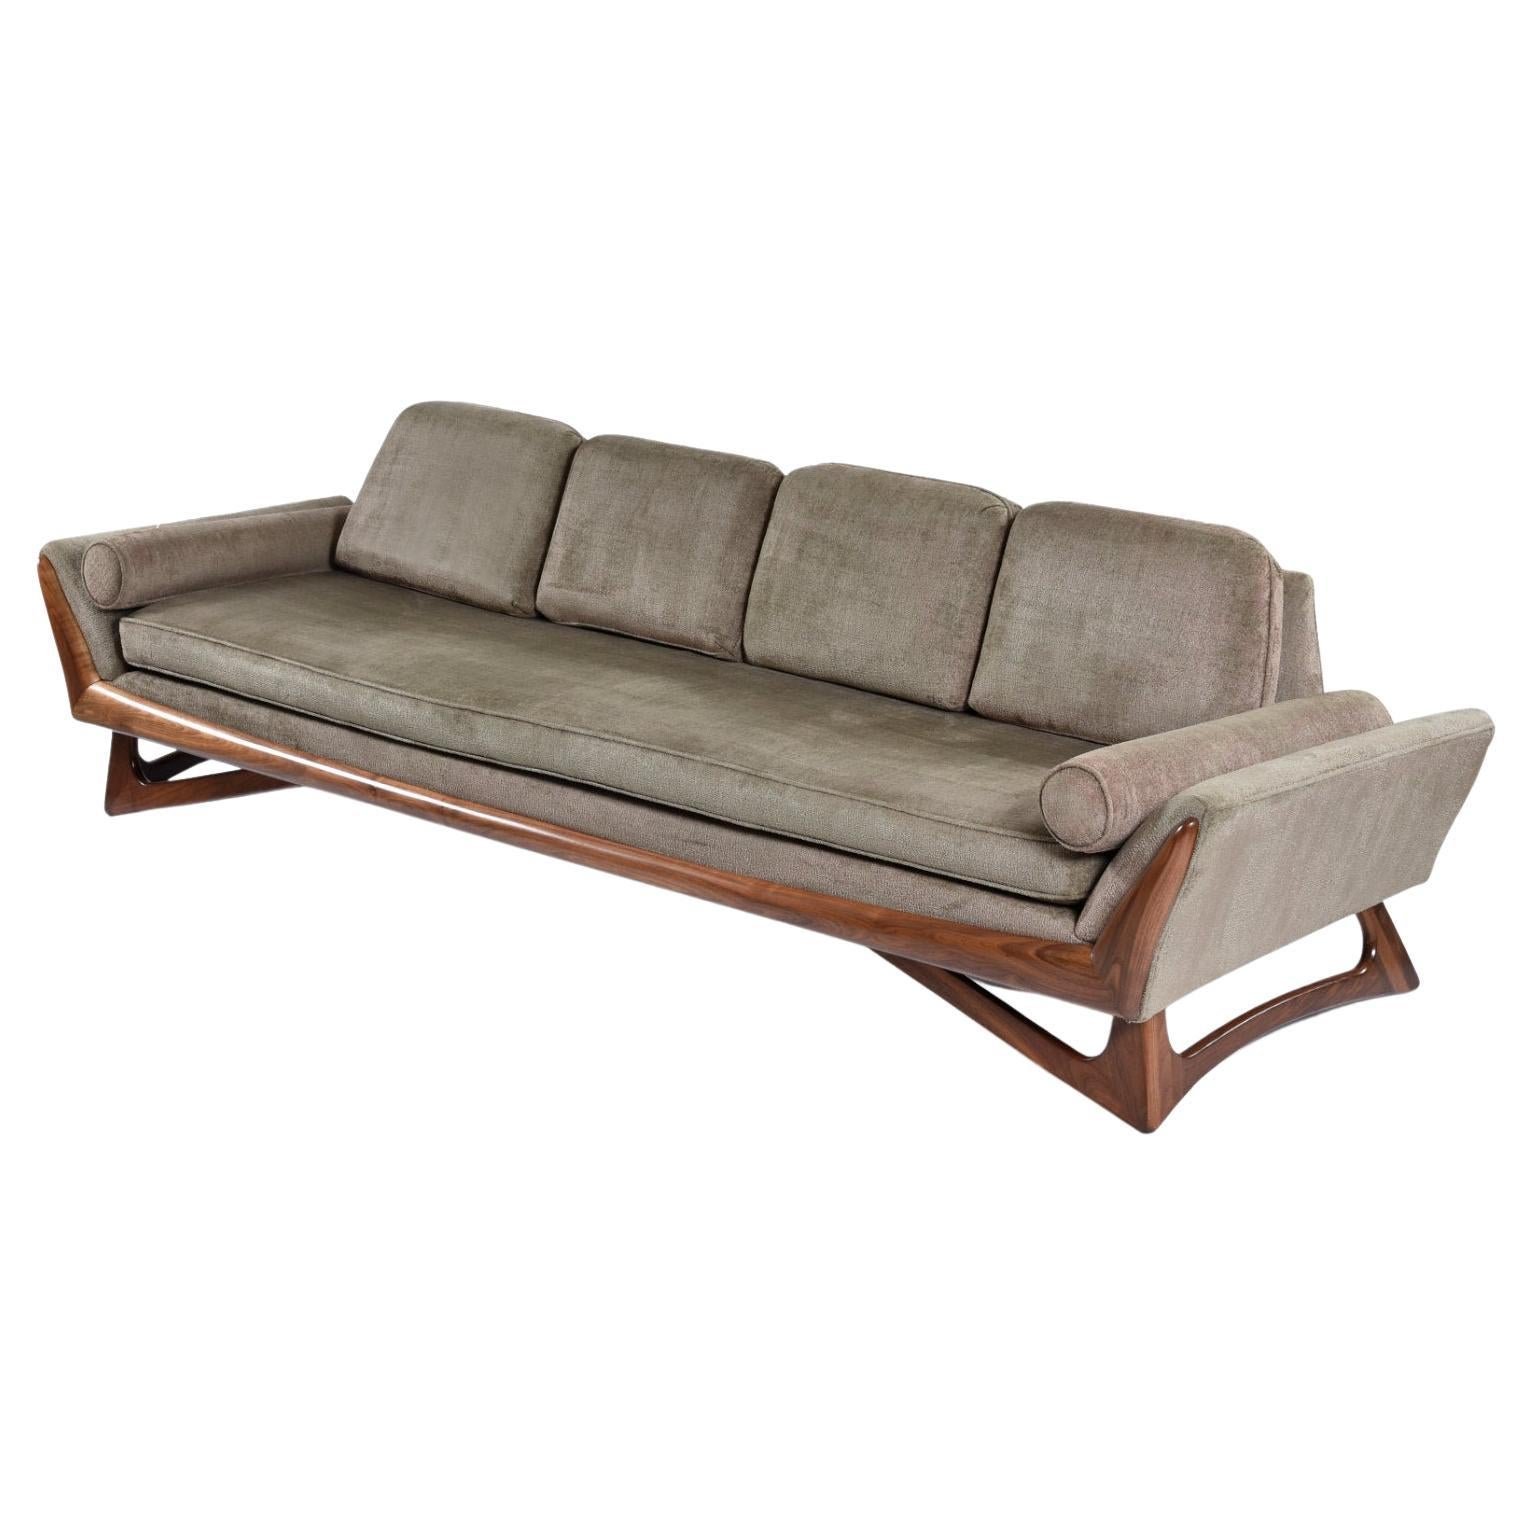 Exceptional four seat Adrian Pearsall style Mid-Century Modern sofa. This gorgeous walnut wood trim couch with triangular legs looks to be the work of Adrian Pearsall. There is no label, so we cannot be certain this piece was created by Pearsall.